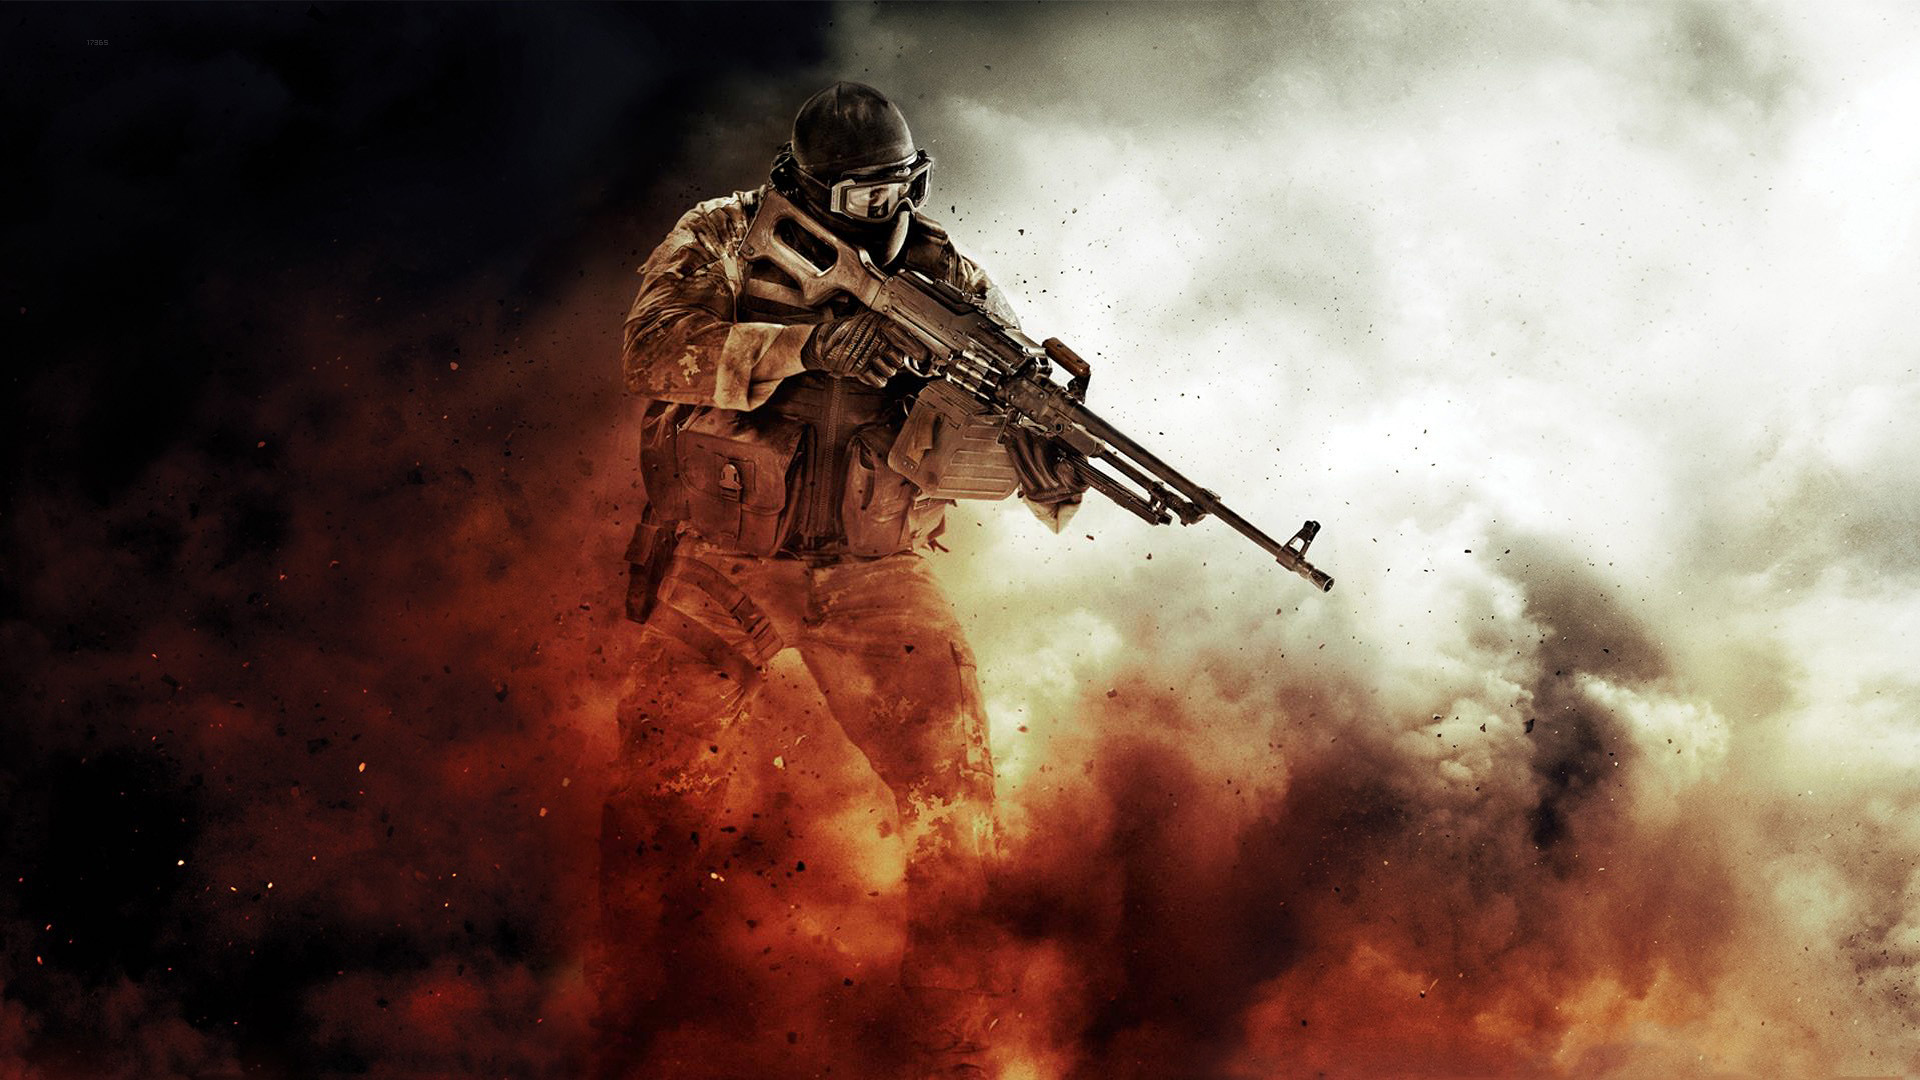 medal of honor, video game, medal of honor: warfighter lock screen backgrounds